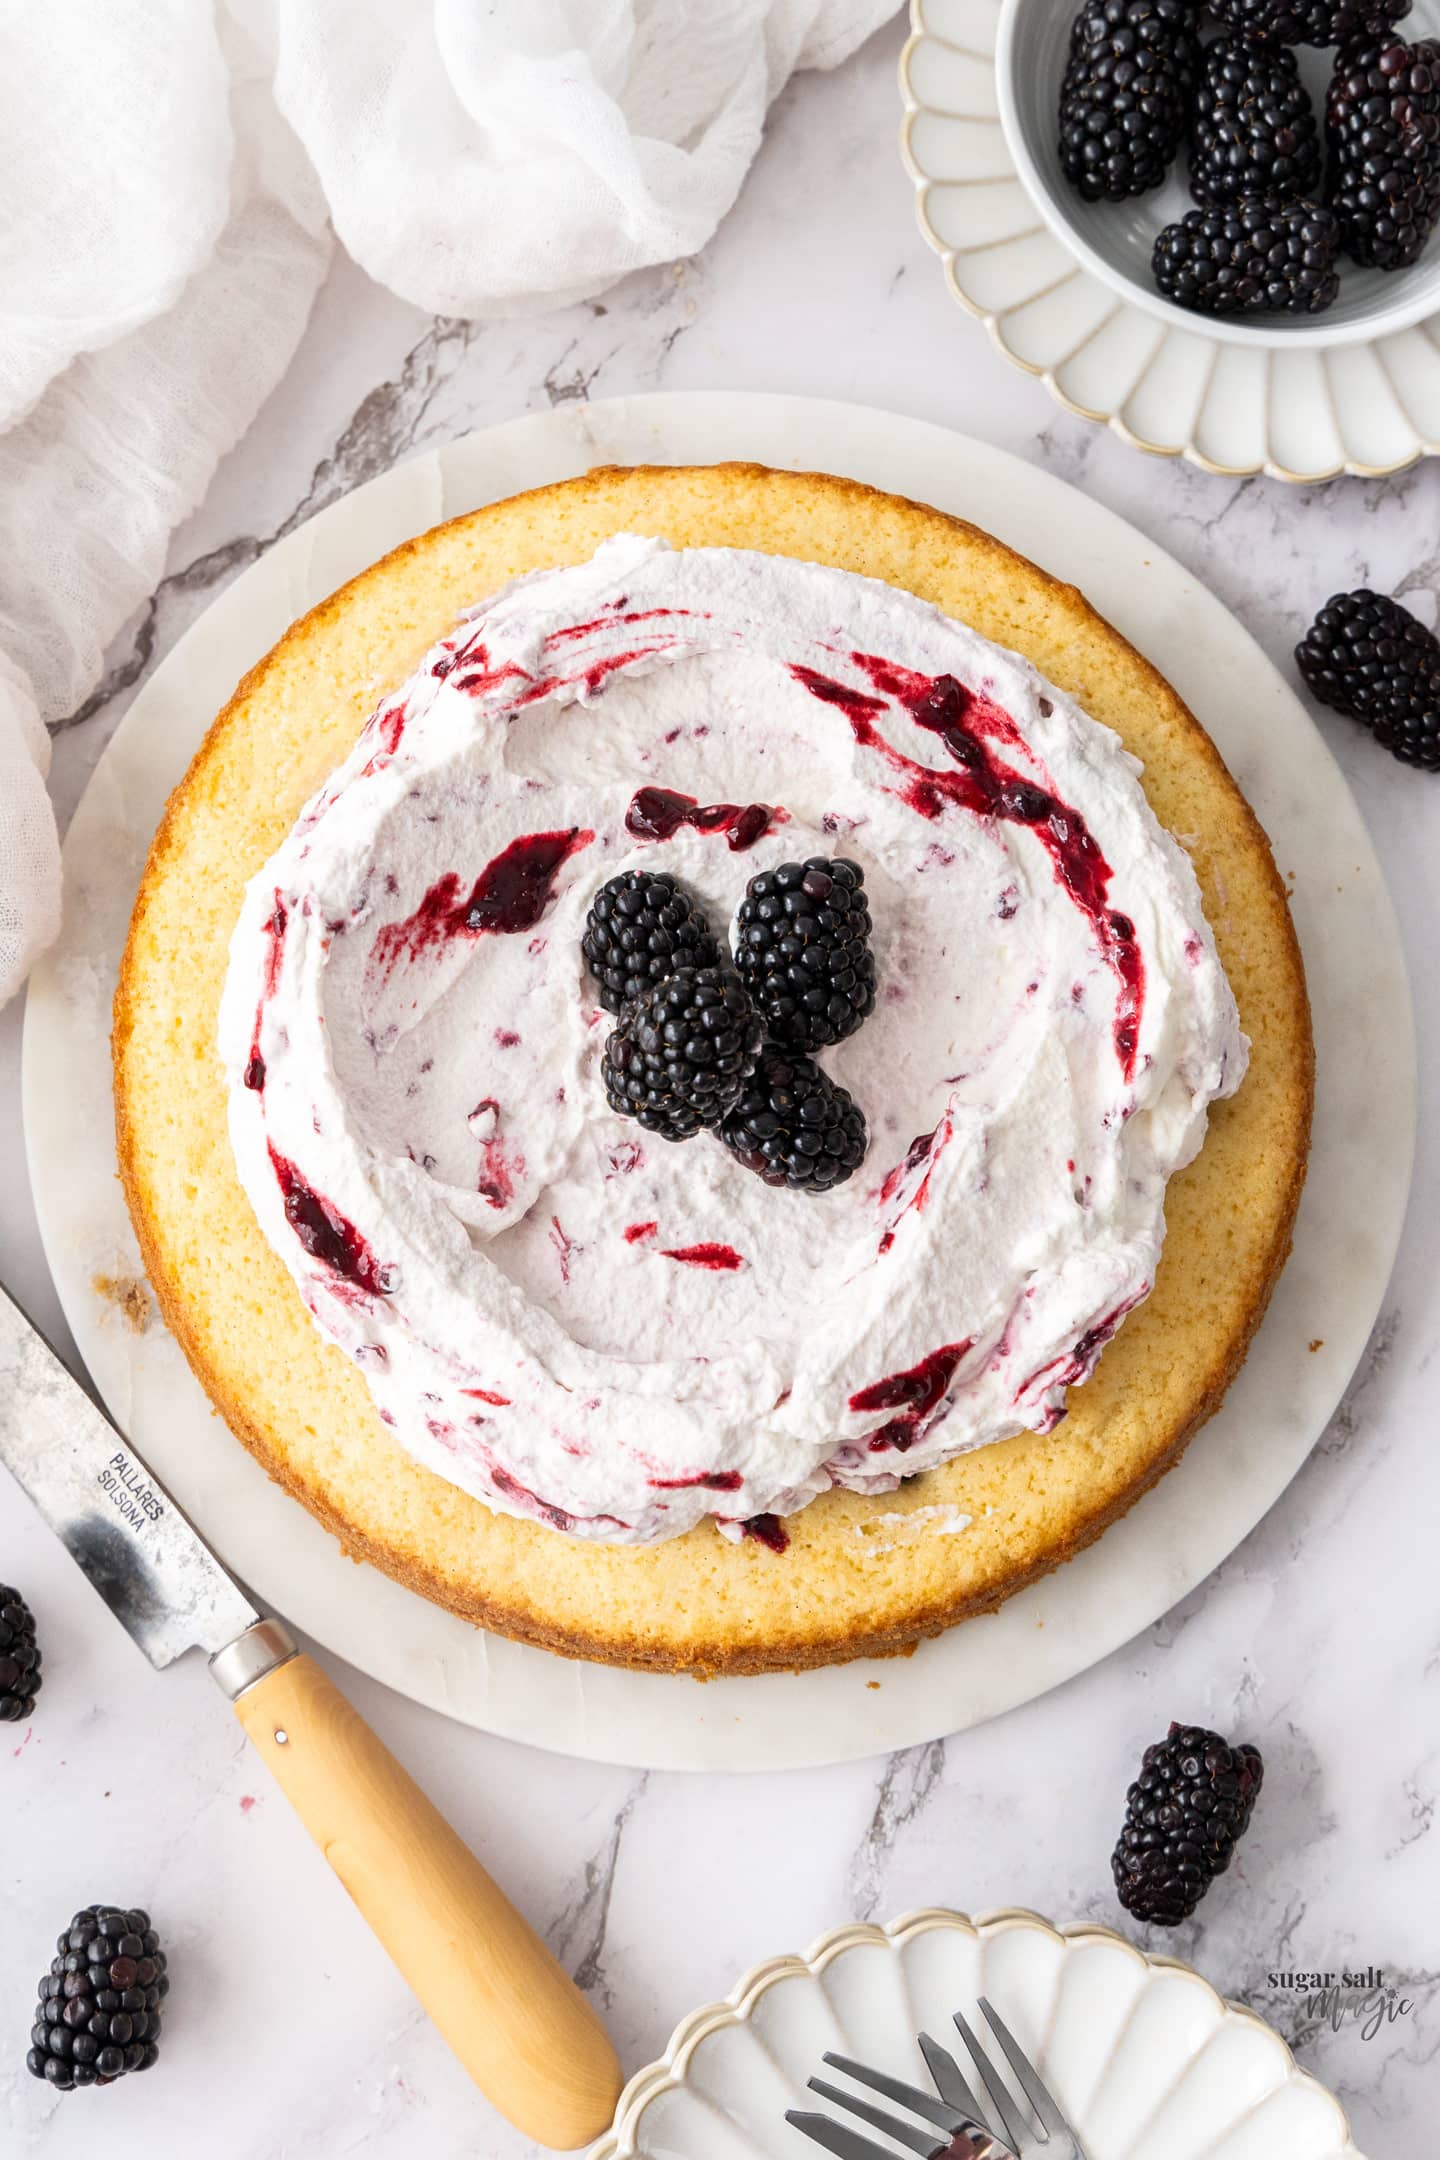 The cake topped with cream and blackberries.